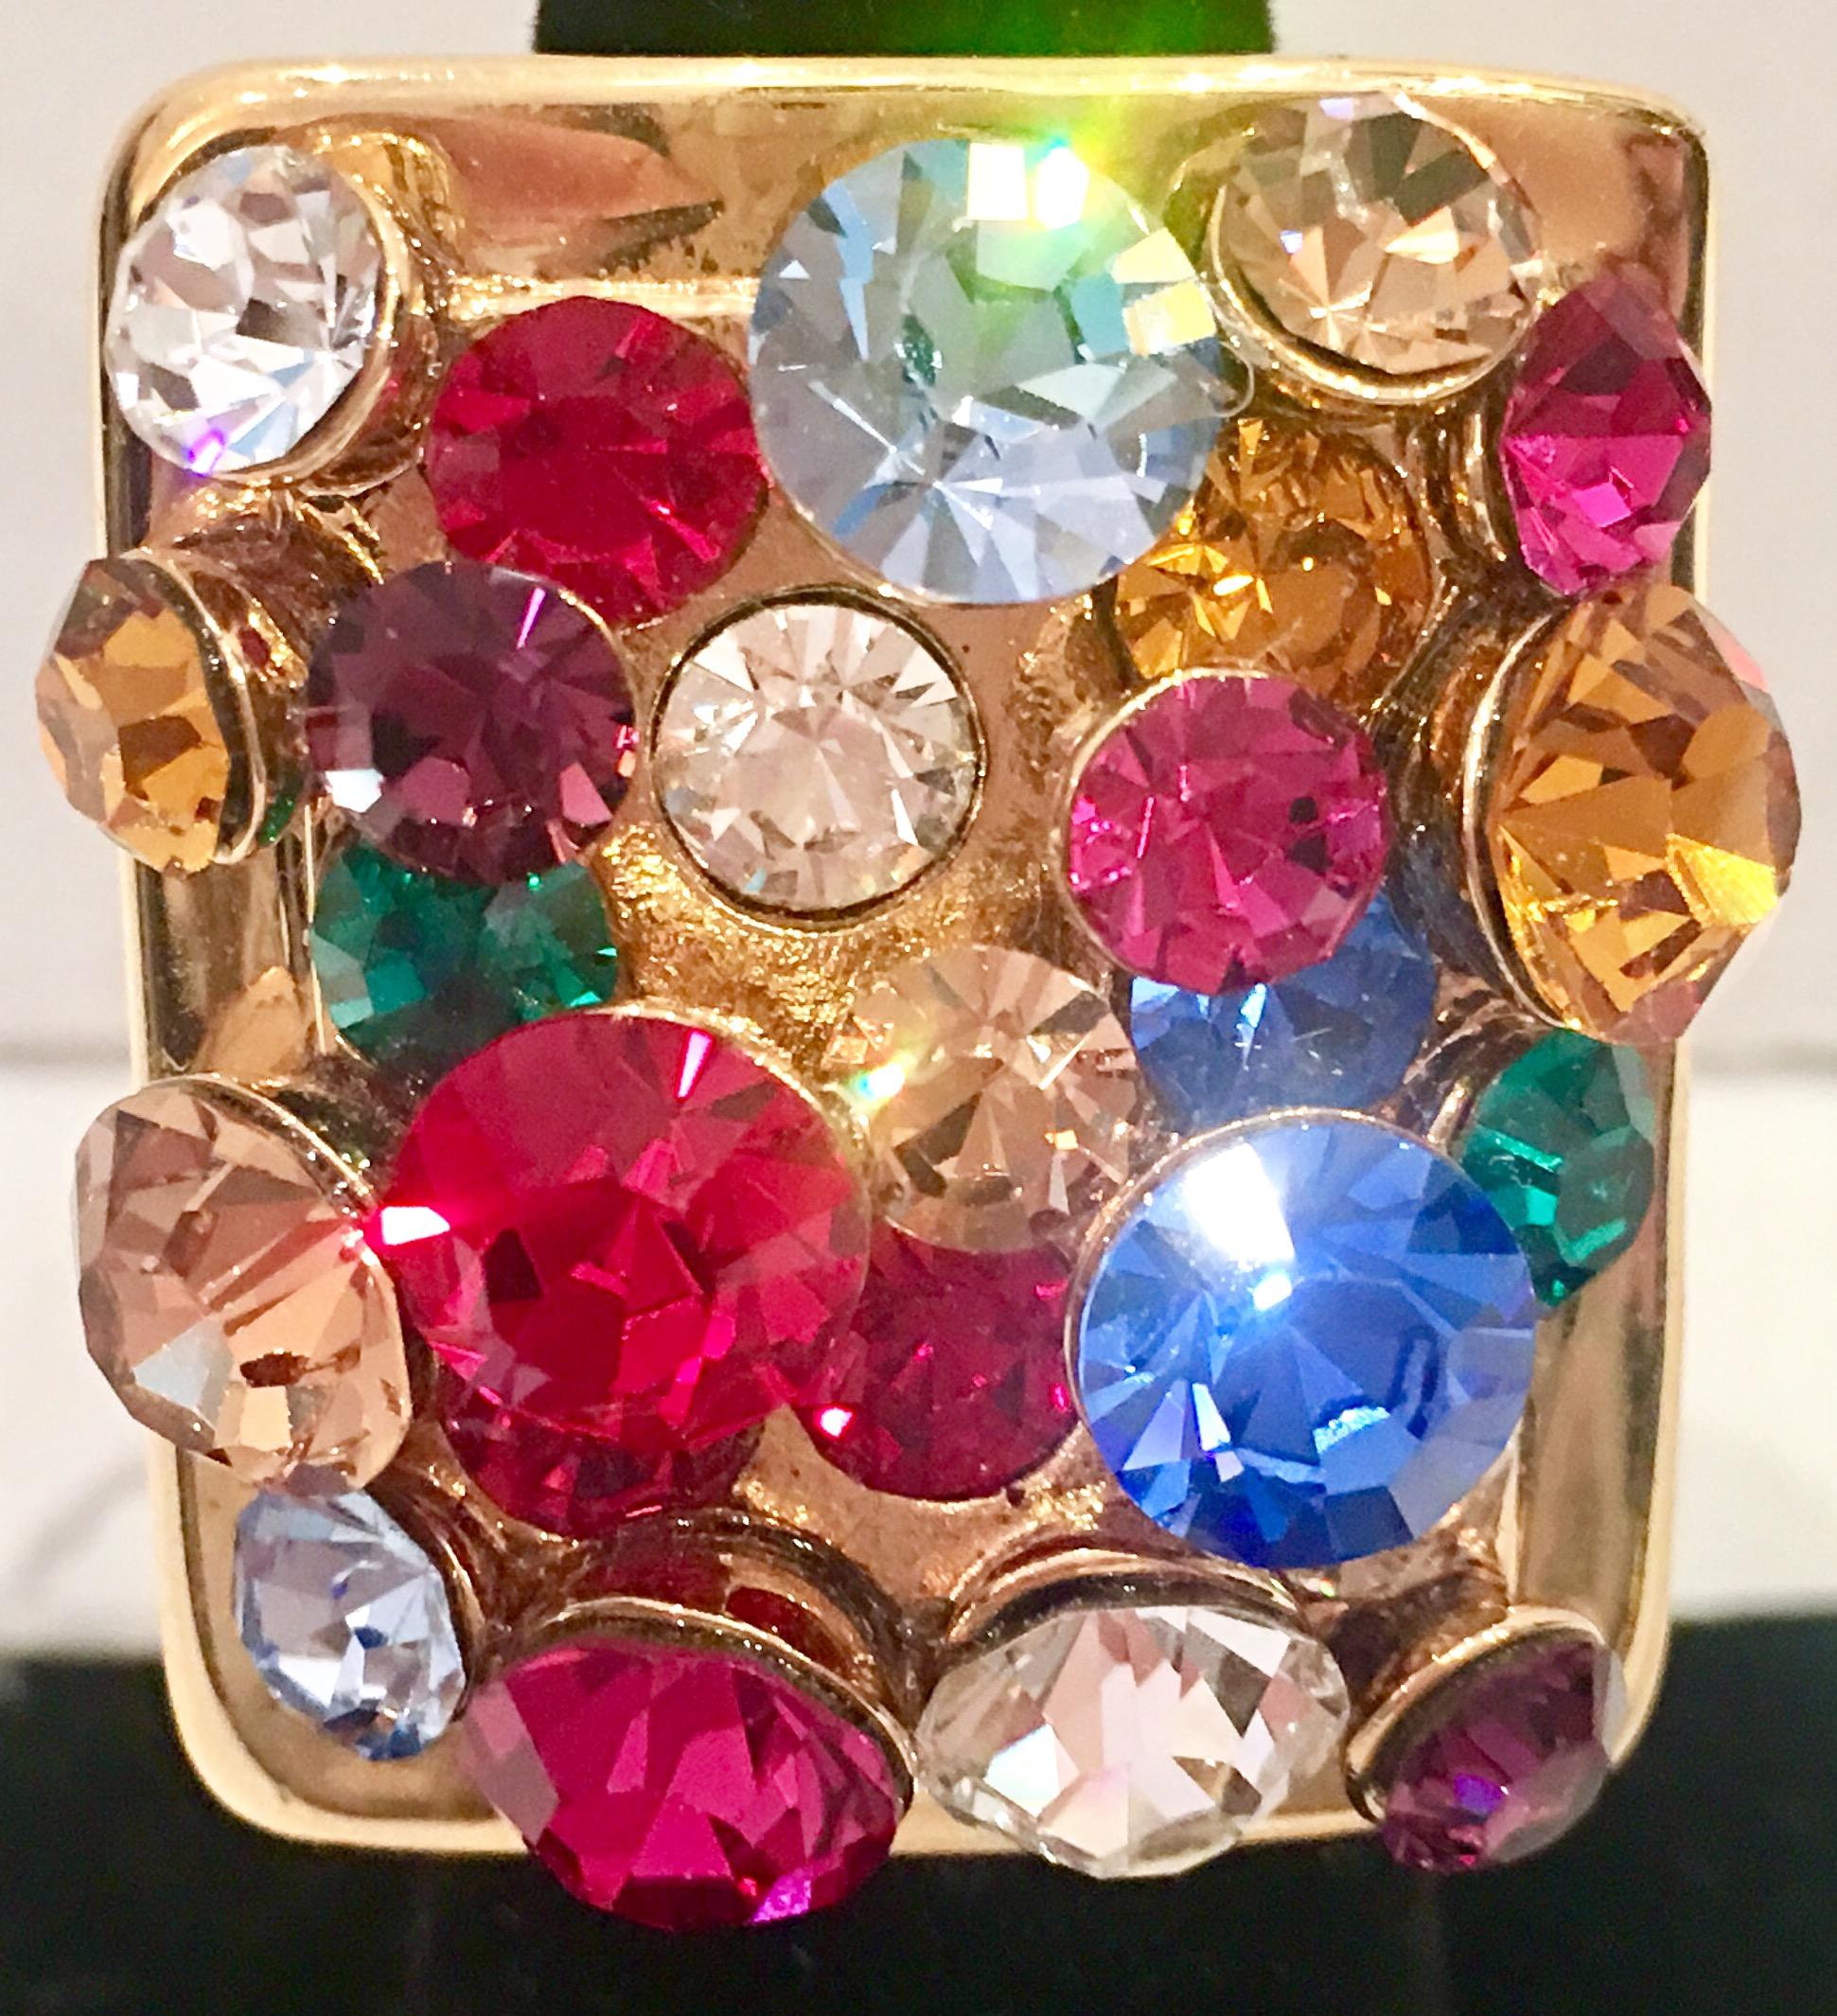 21st Century Gold & Swarovski Crystal Cocktail Ring By, Kate Spade In Excellent Condition For Sale In West Palm Beach, FL